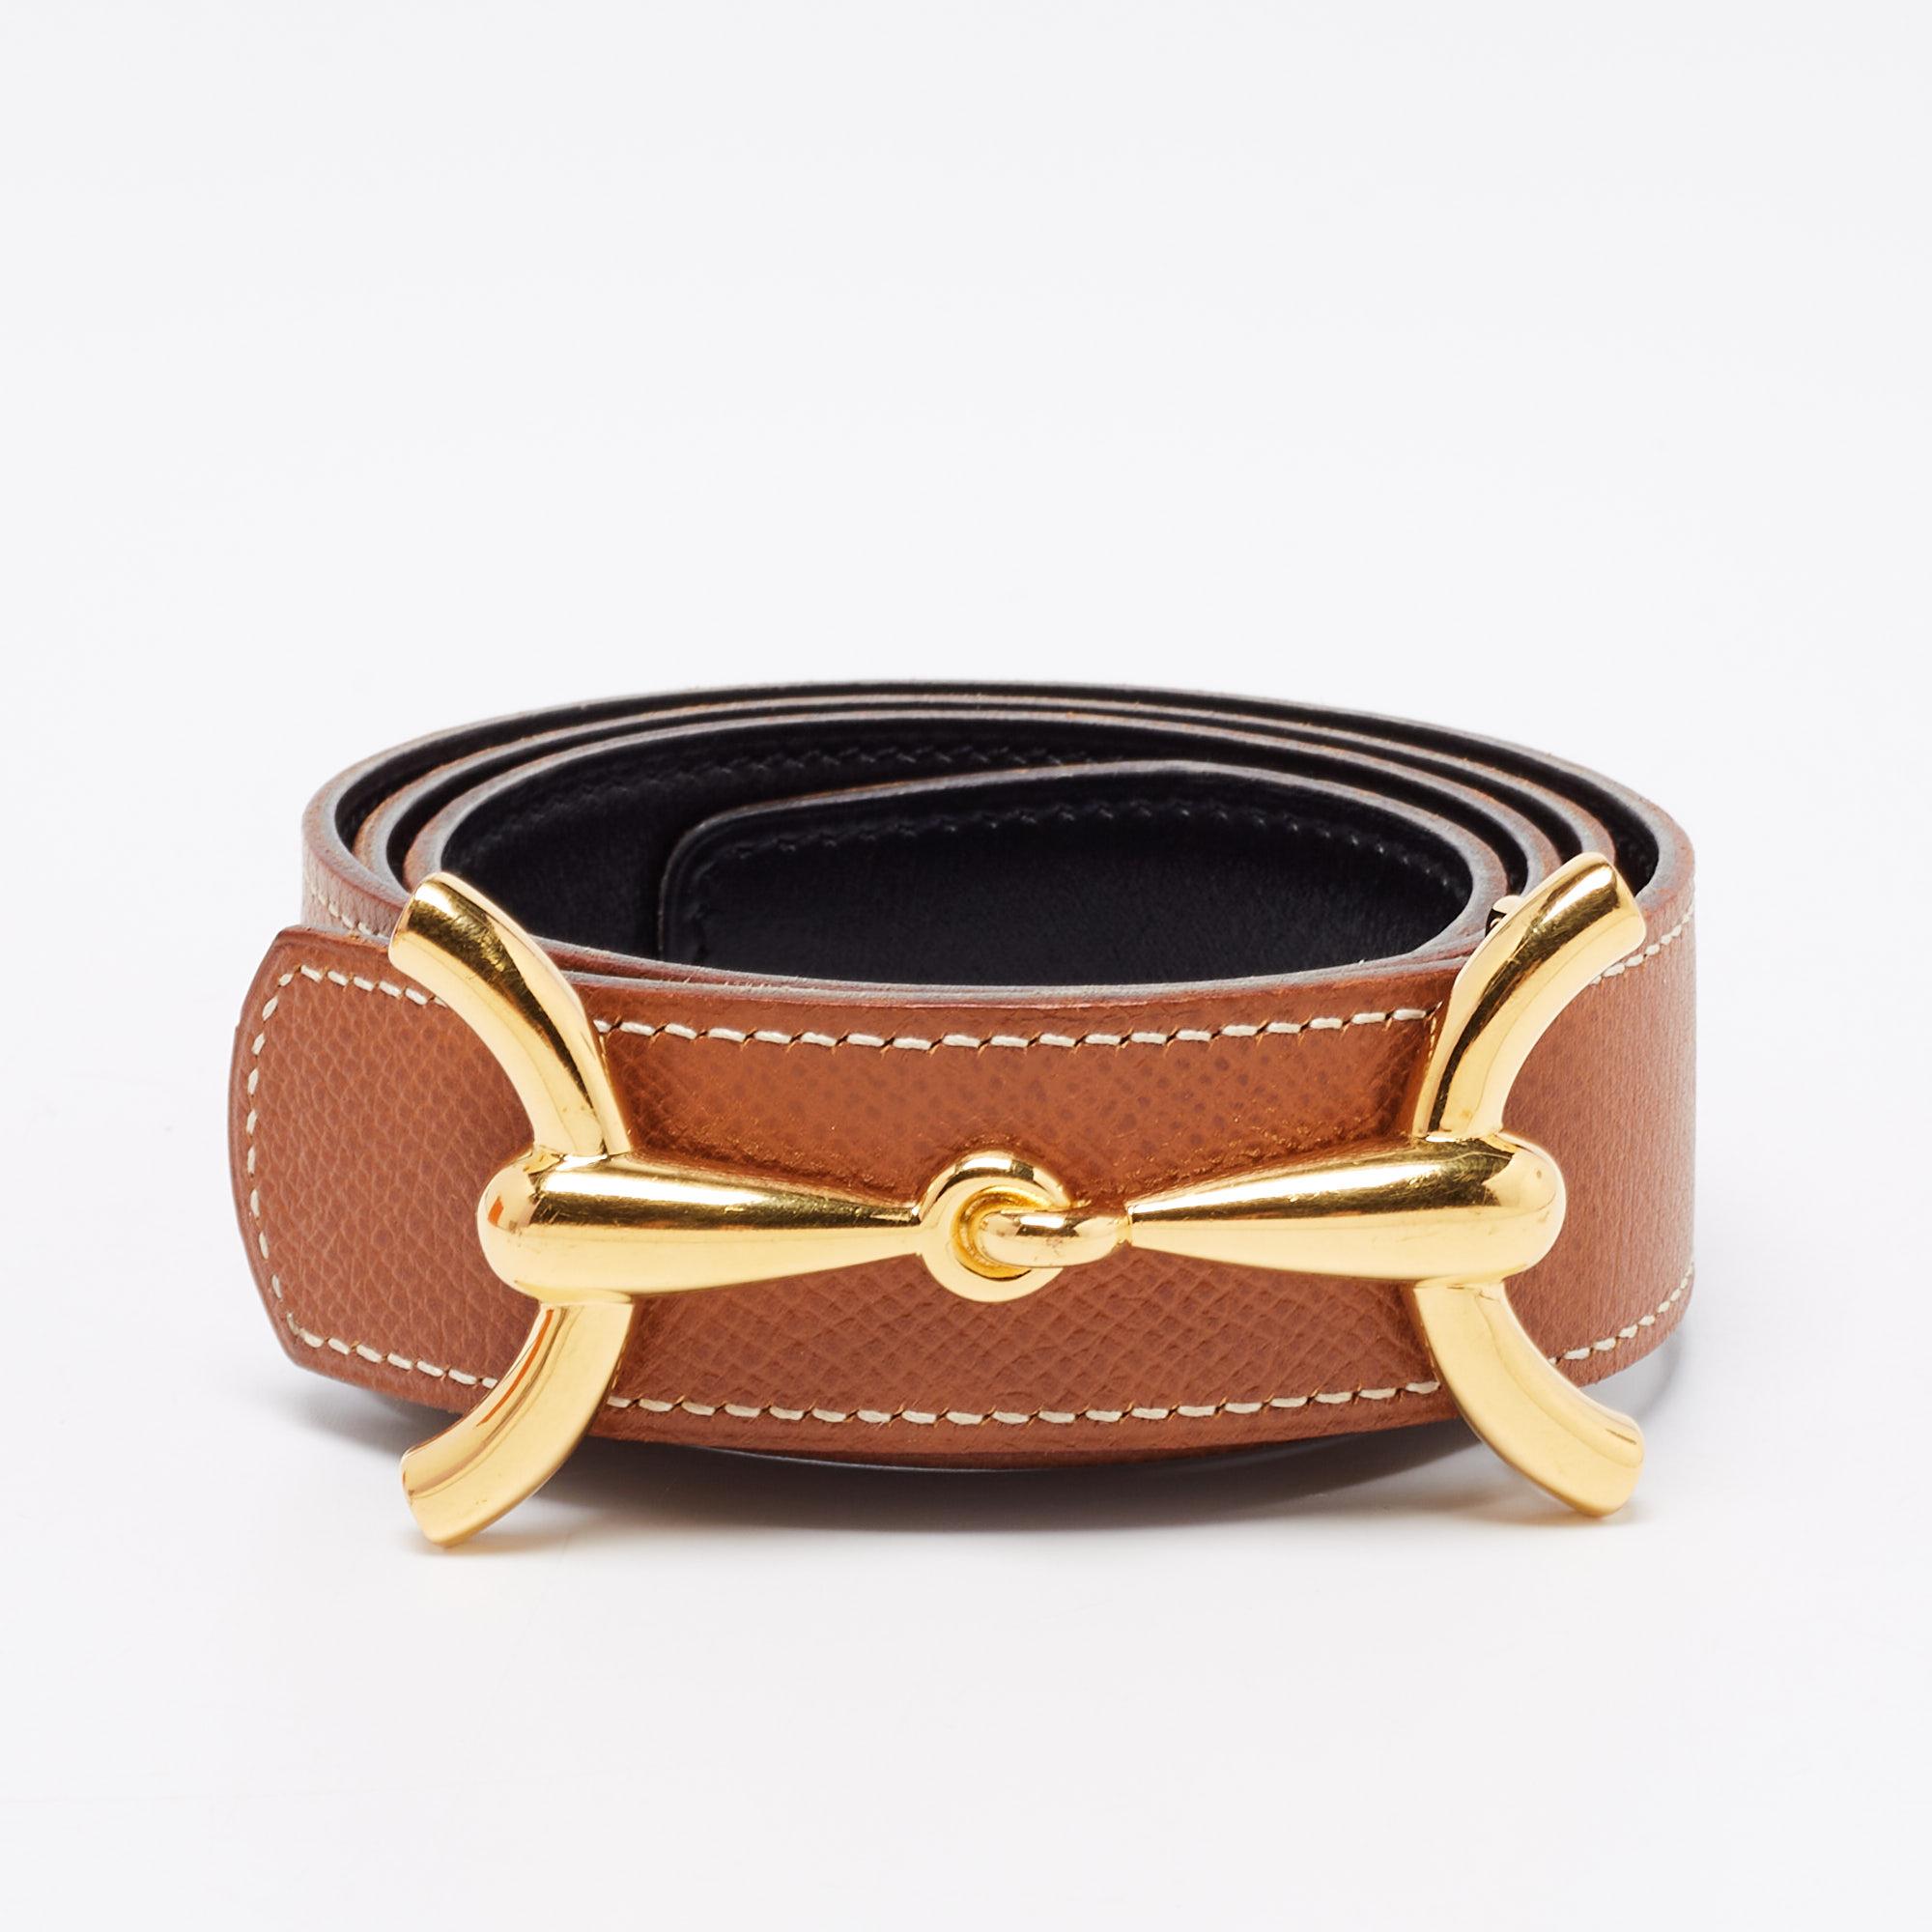 Get the use of two in one with this H Hippique reversible Hermes belt. It is made from Courchevel and Box leather with black on one side and Hermes gold on the other. It is finished with a stunning gold-tone H buckle.

Includes: Original Box
